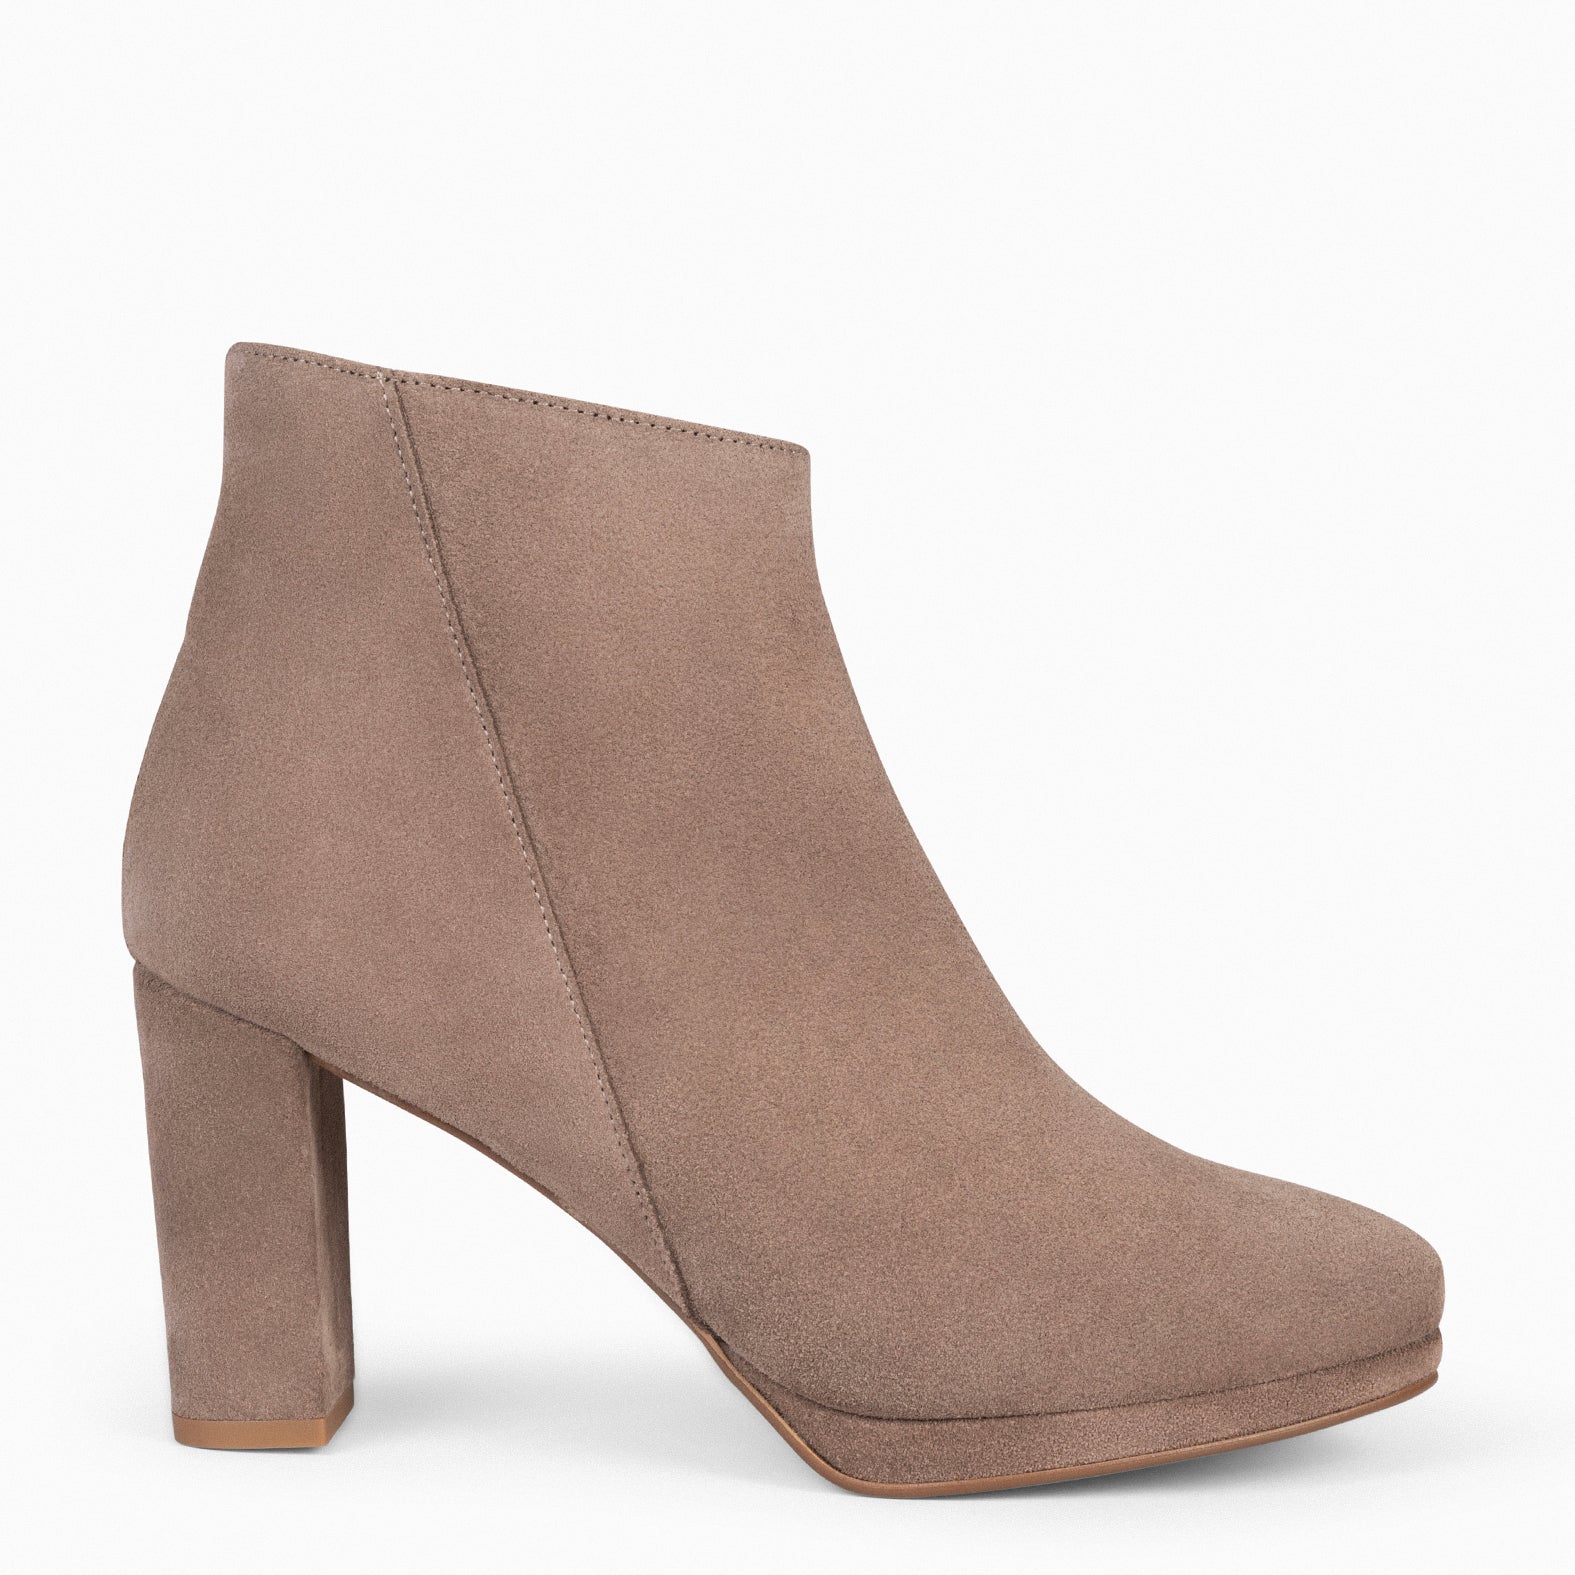 WITTEN - TAUPE booties with platform